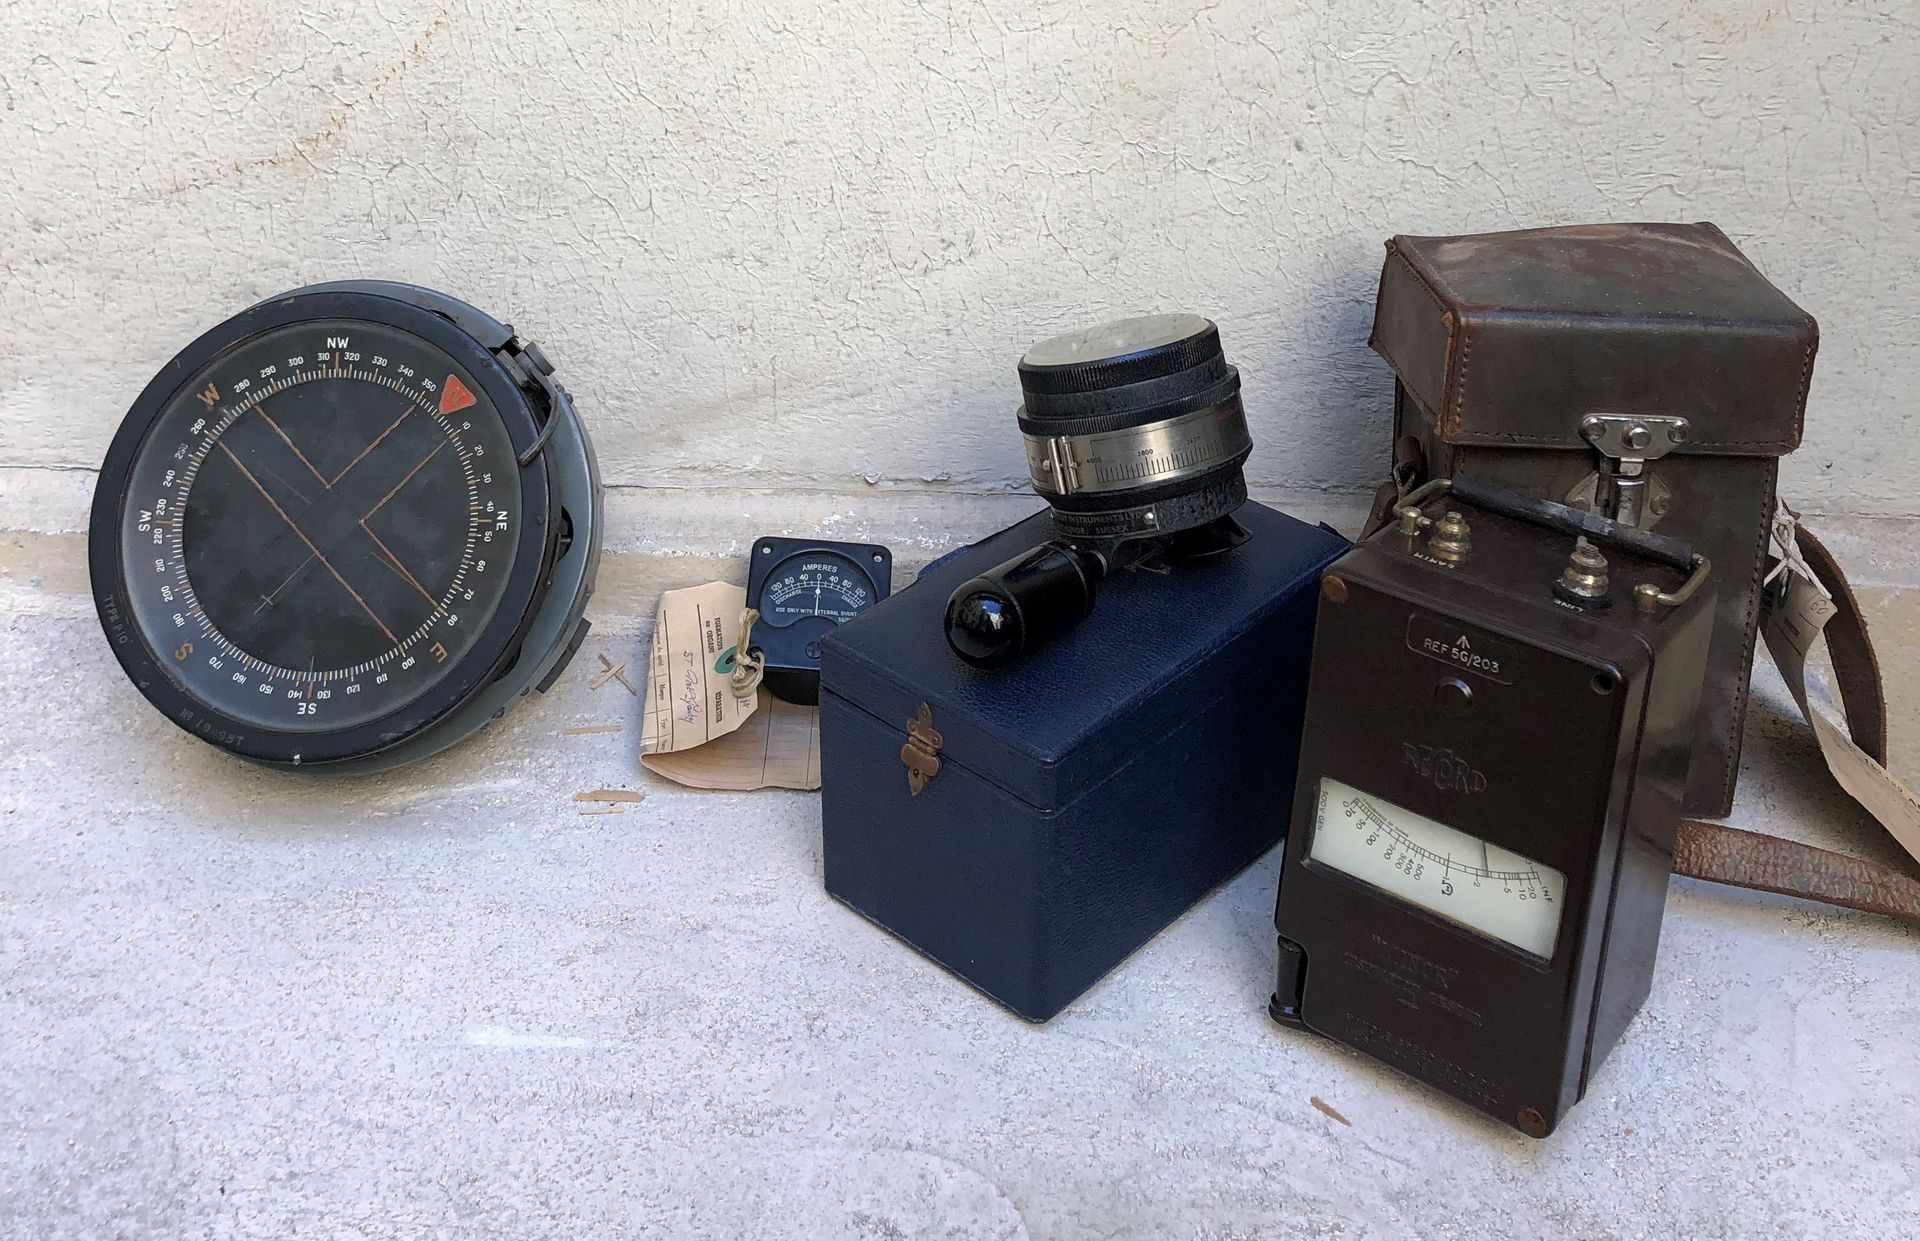 Null Lot of instruments including :

- Marine compass

- Ohmeter

- Ammeter

- S&hellip;